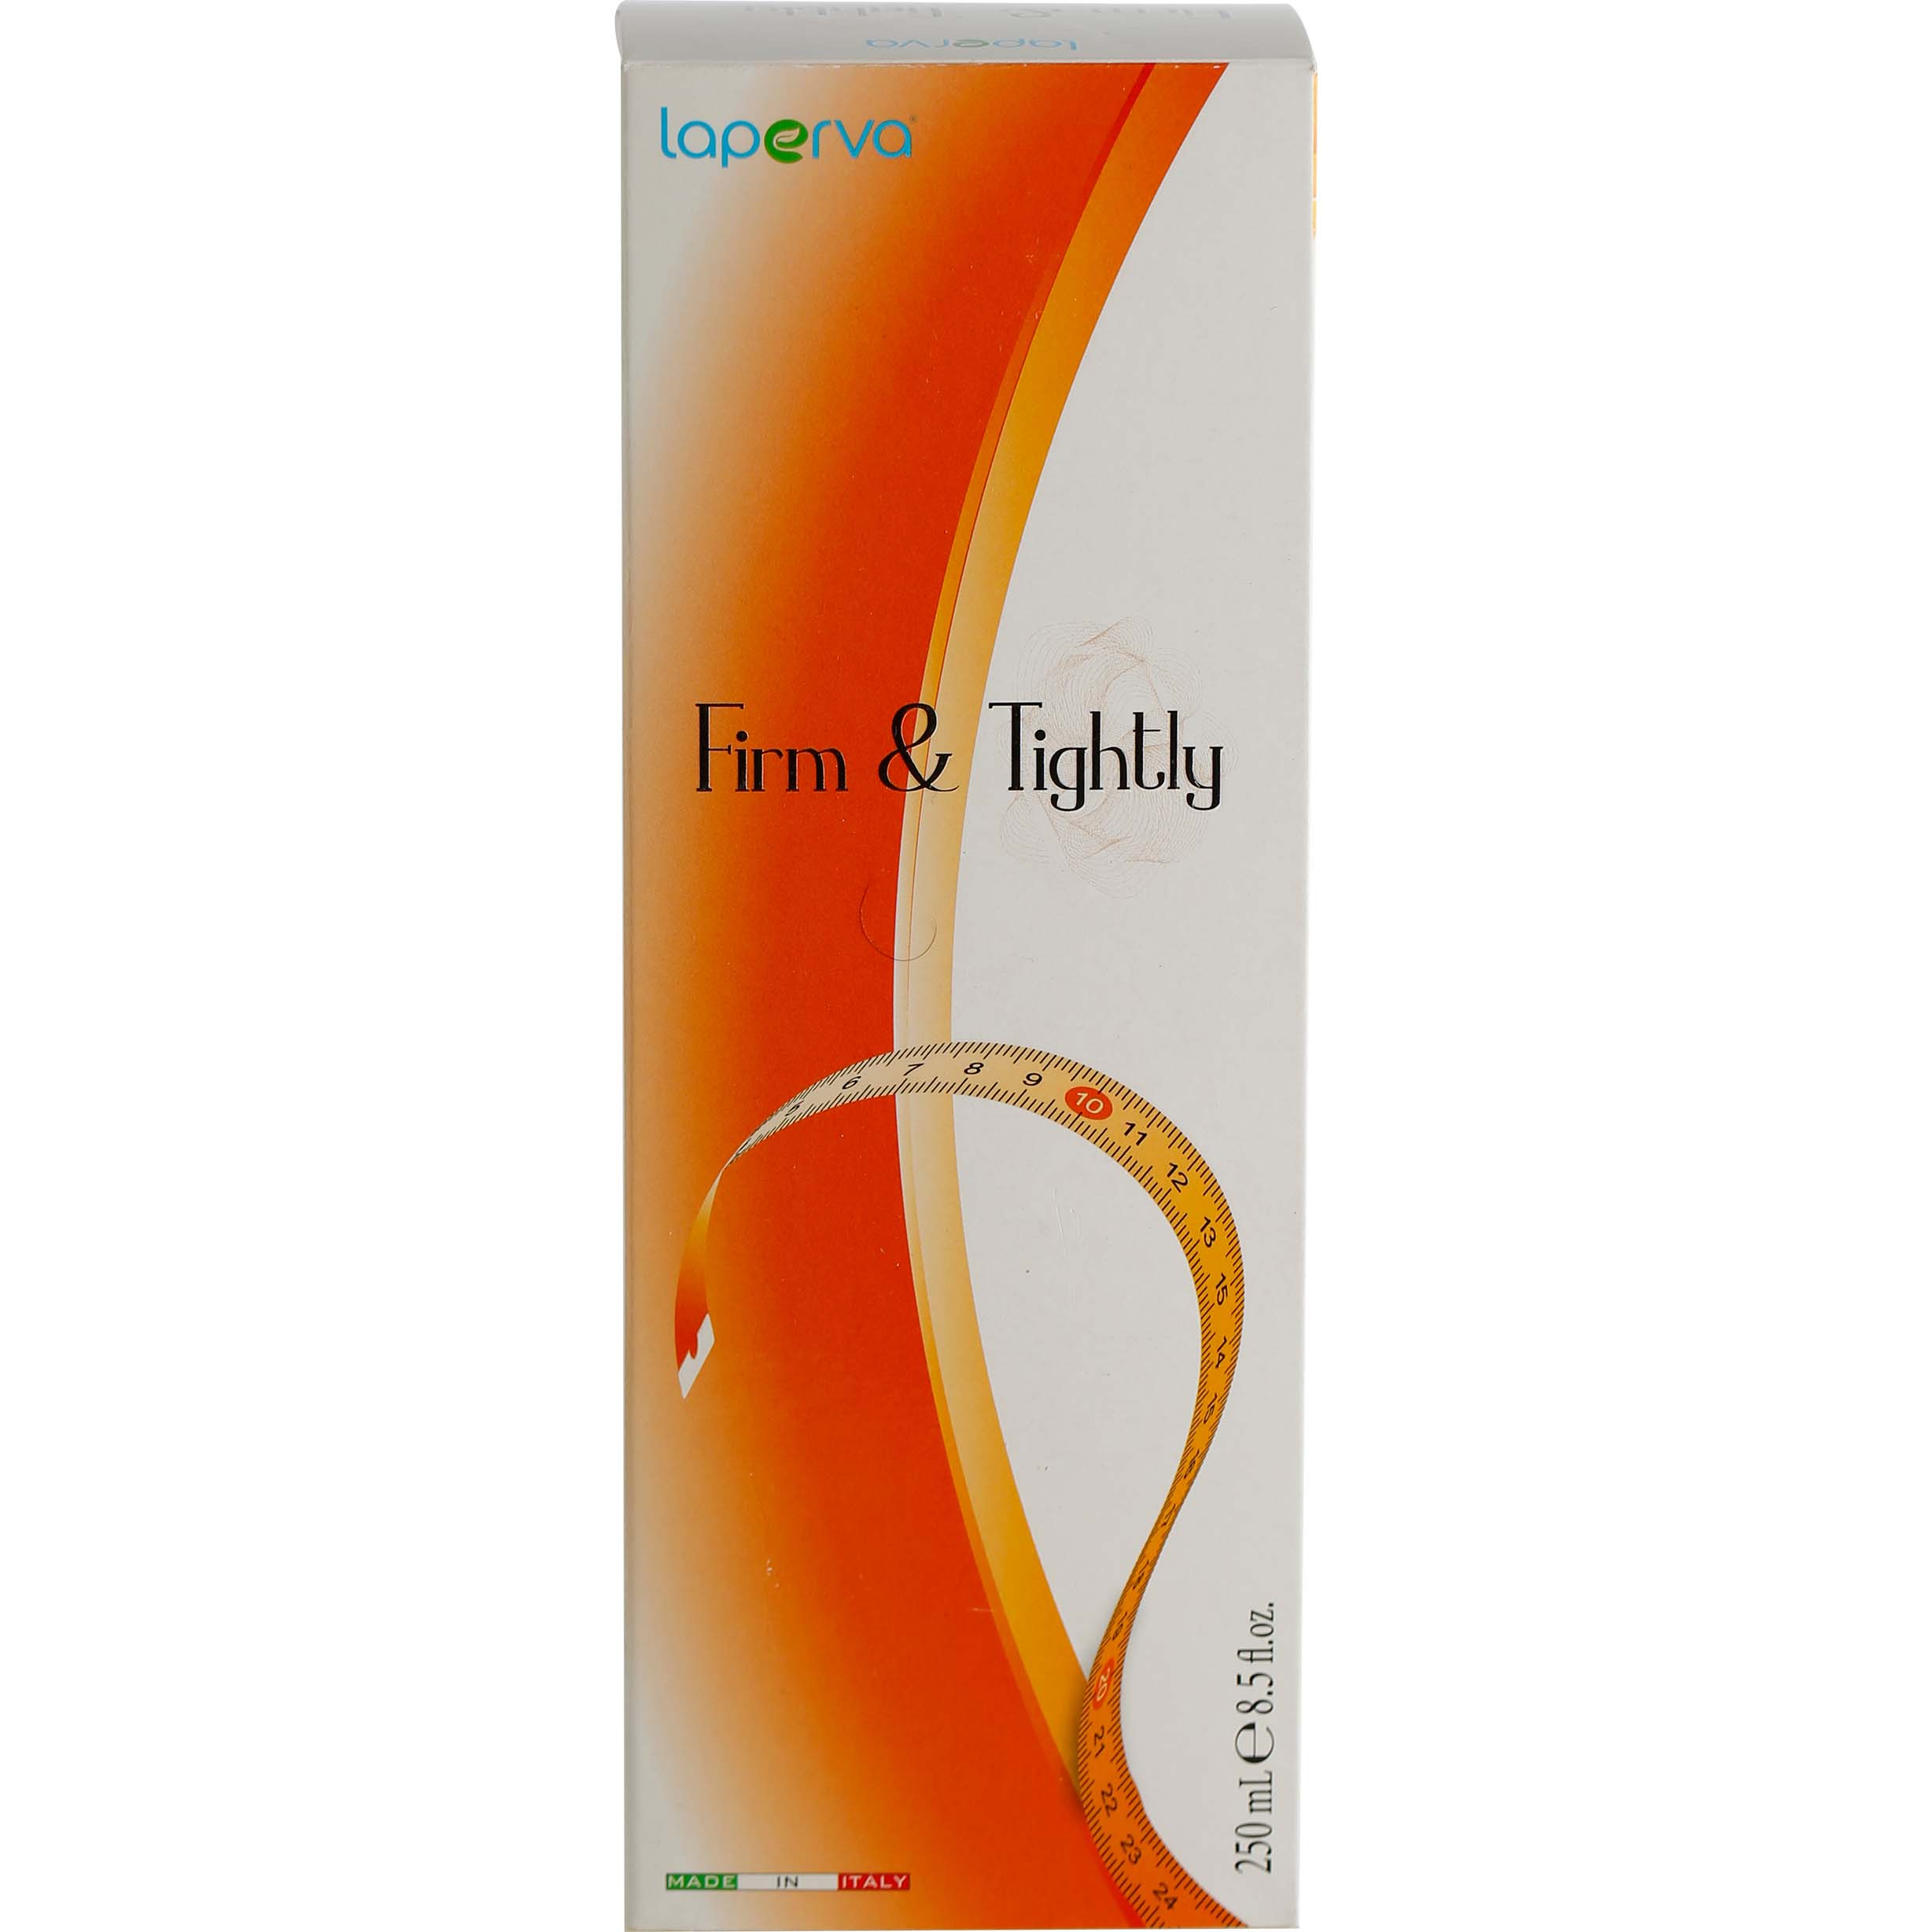 Laperva Firm and Tightly Slimming Cream 250 ML